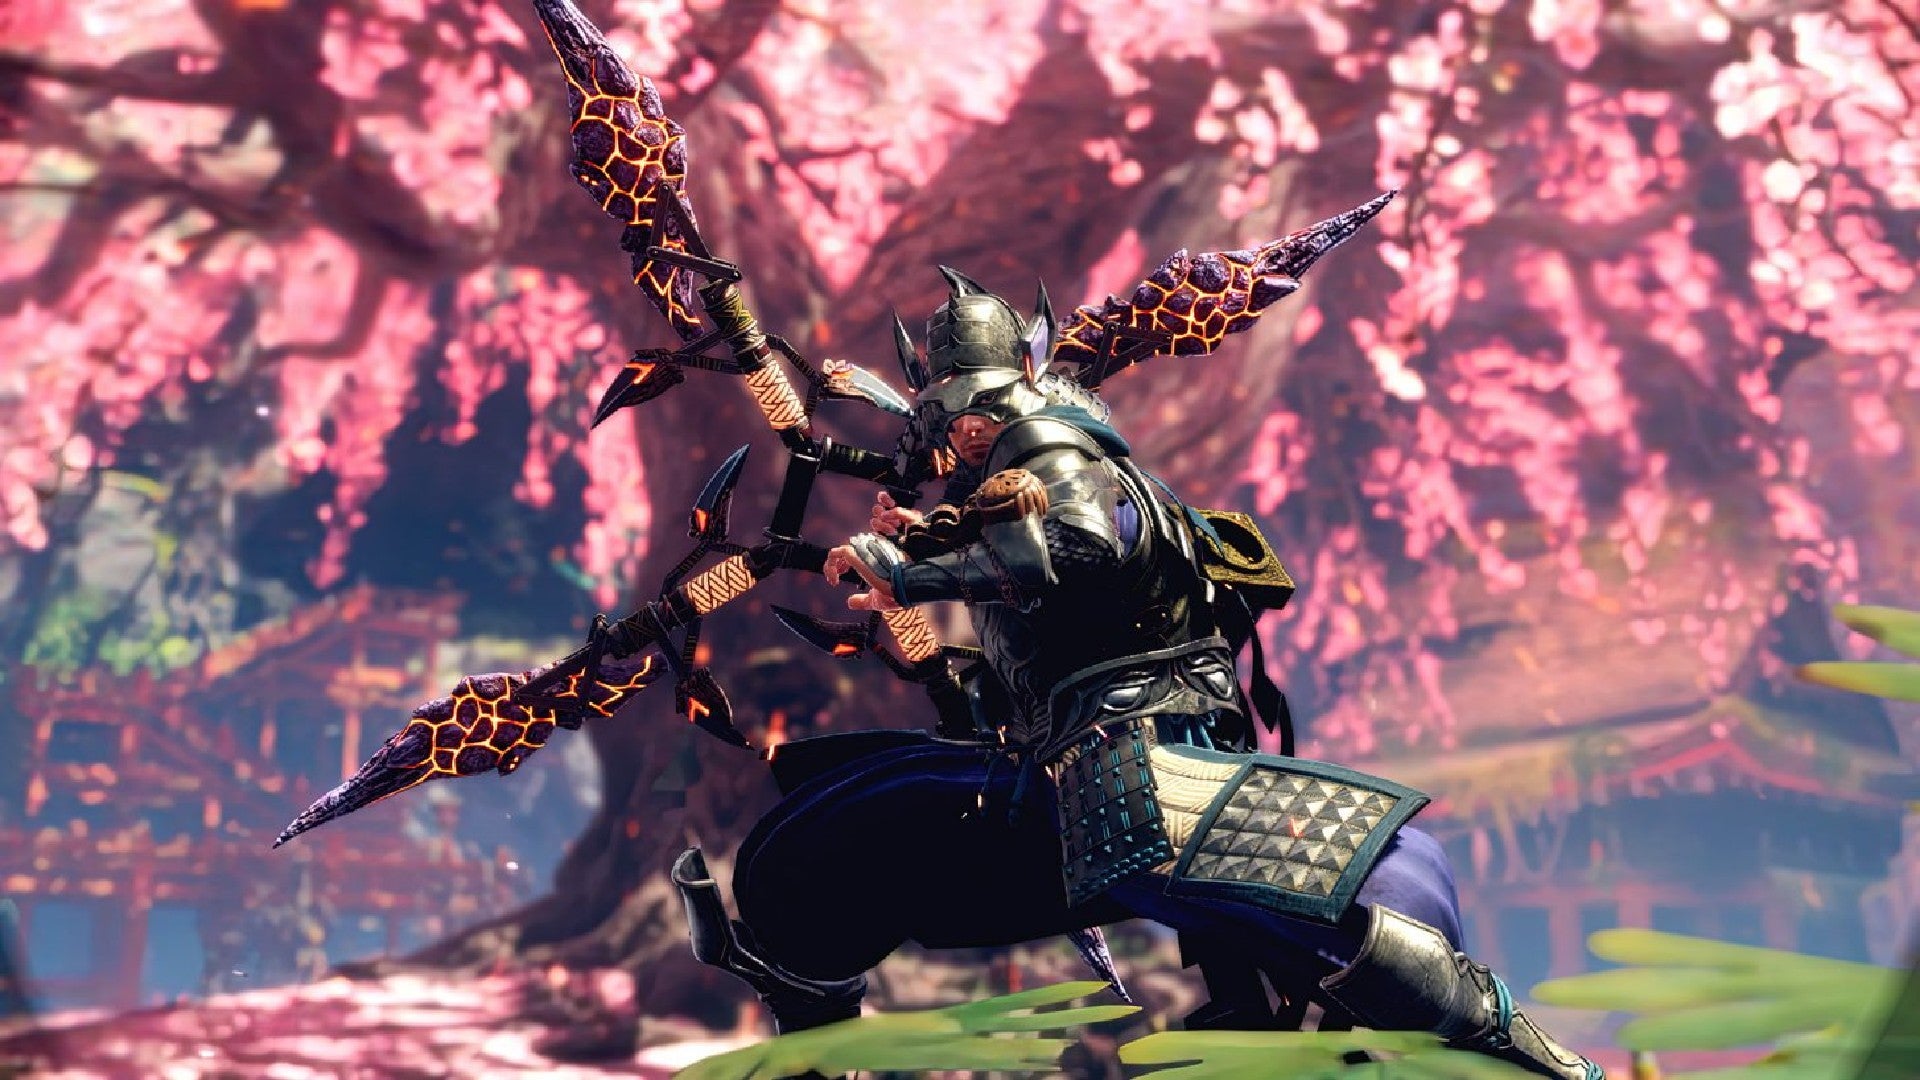 Wild Hearts image showing a player wearing samurai armor and holding a large bow, with a flowering tree in the background.